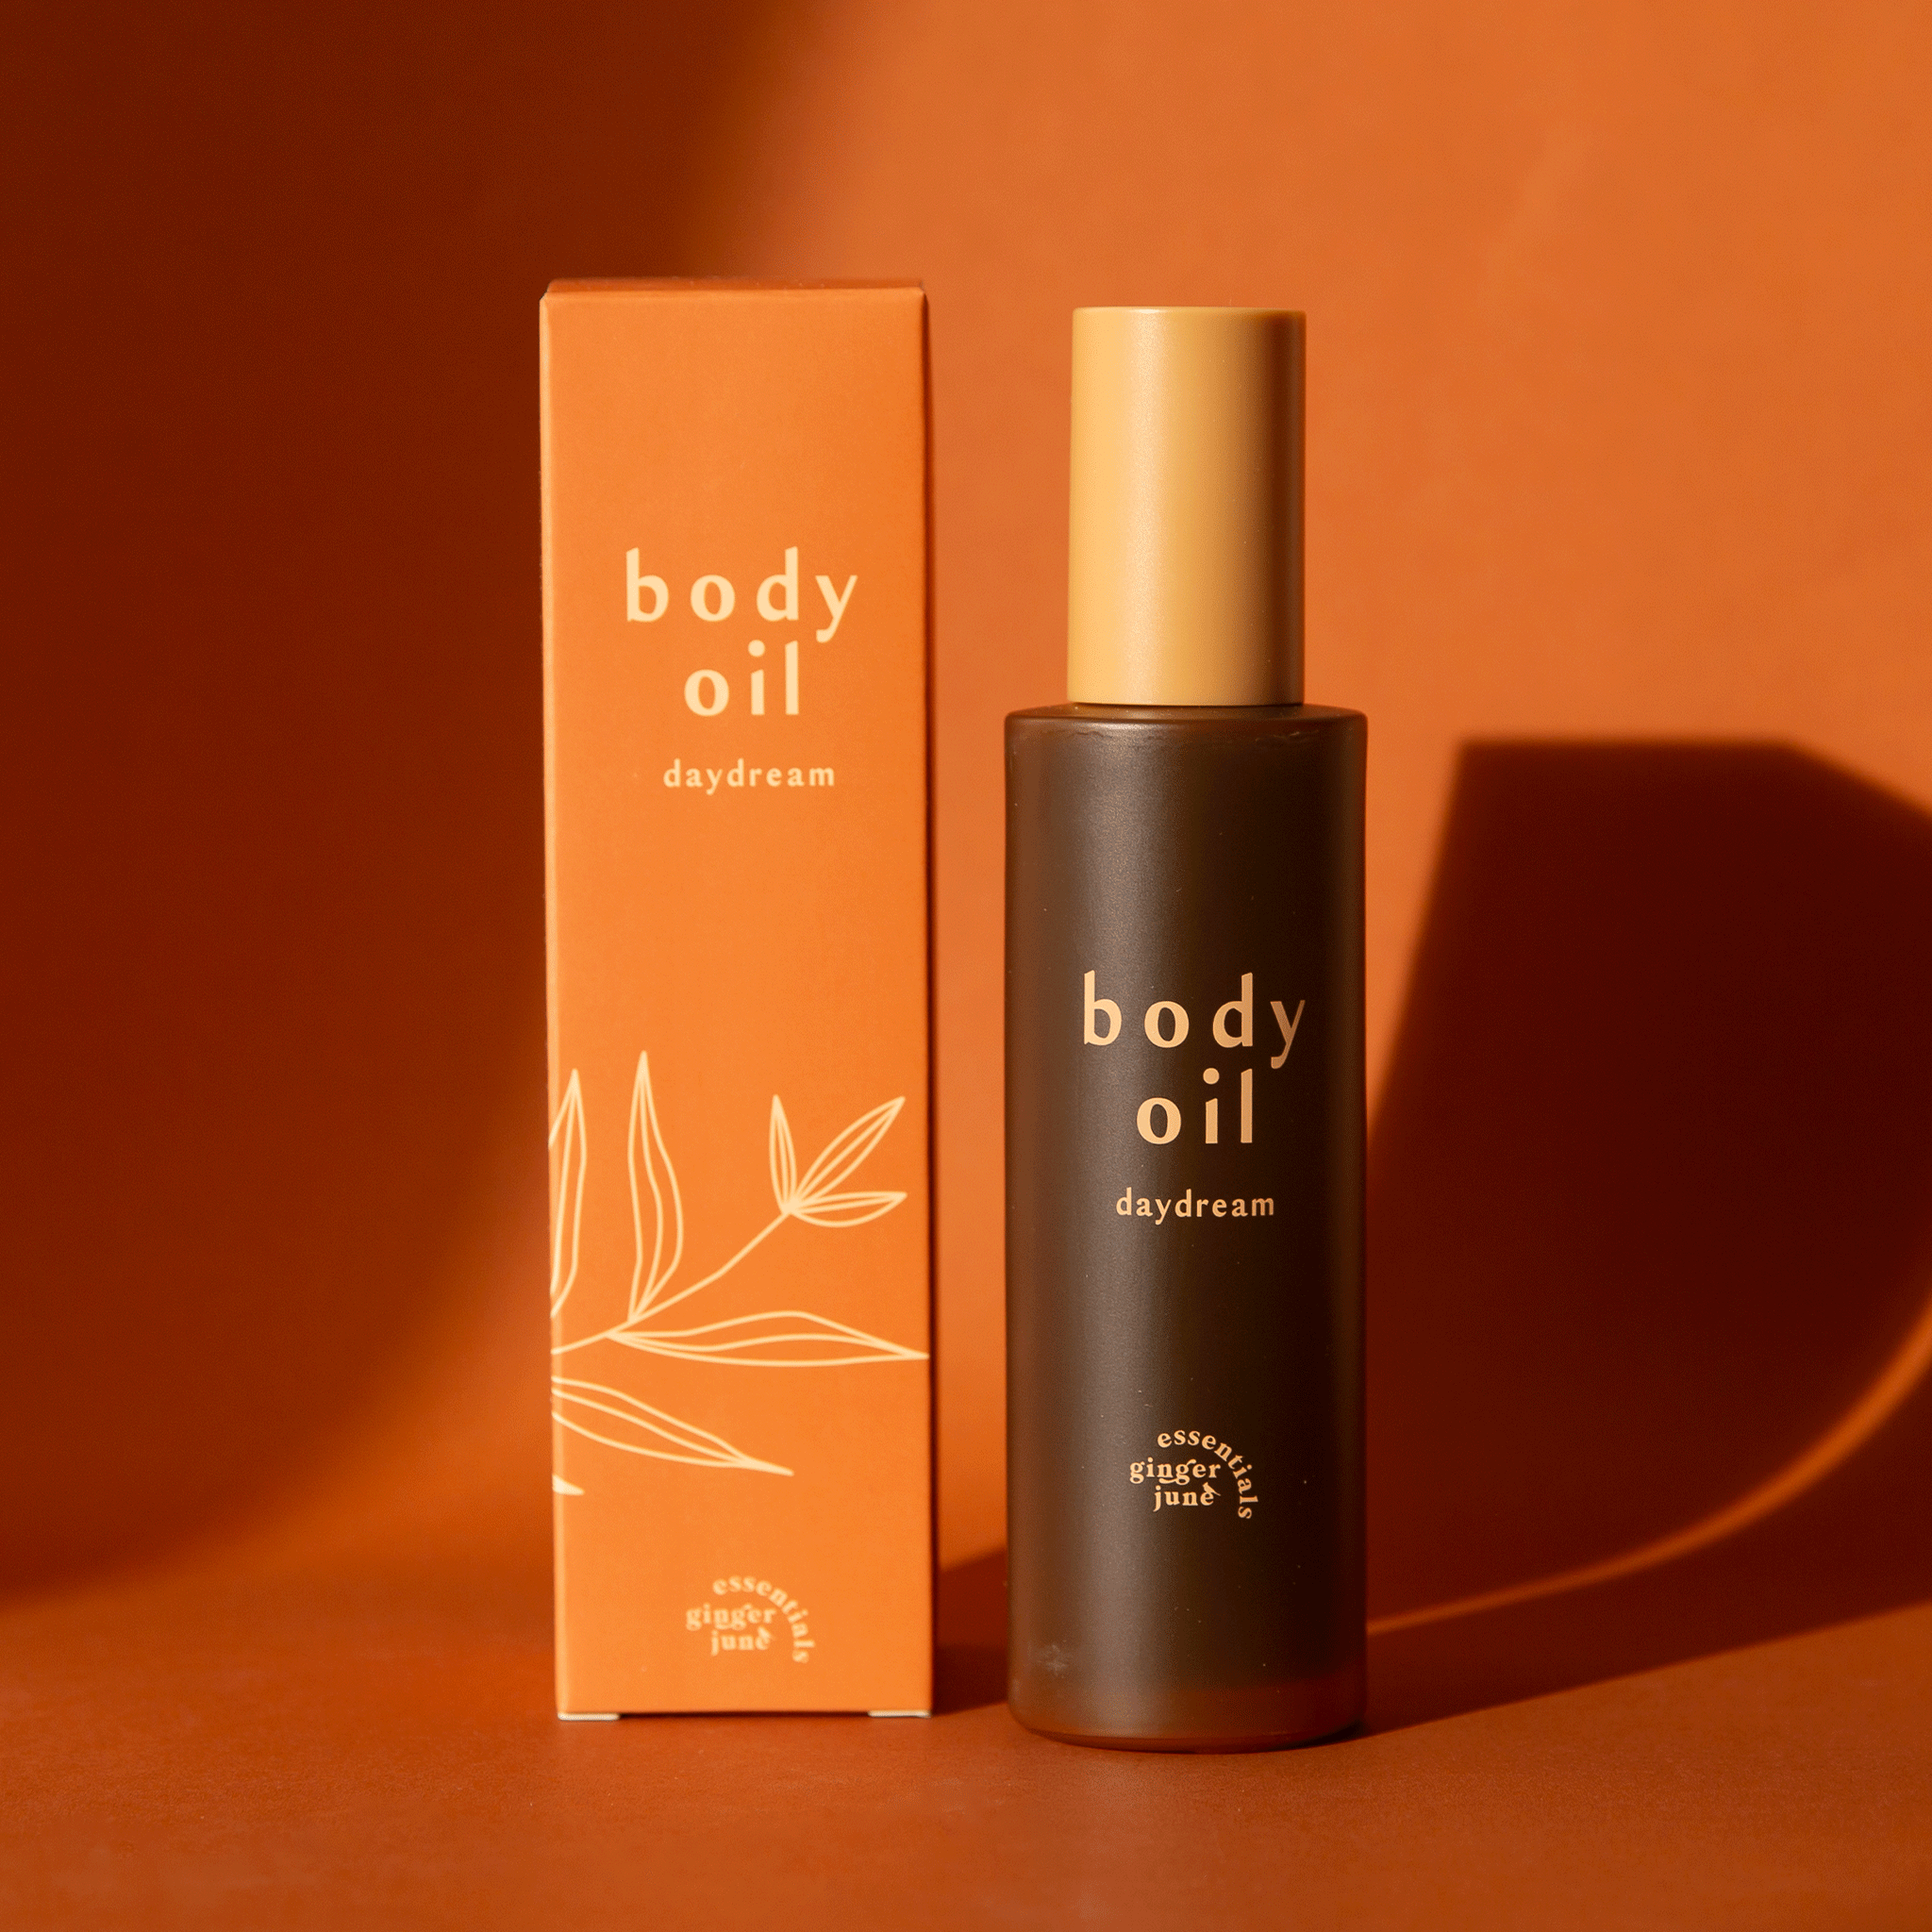 On an orange background is a bottle of body oil with a tan cap and an orange box packaging along with text on the front that reads, &quot;body oil daydream&quot;.